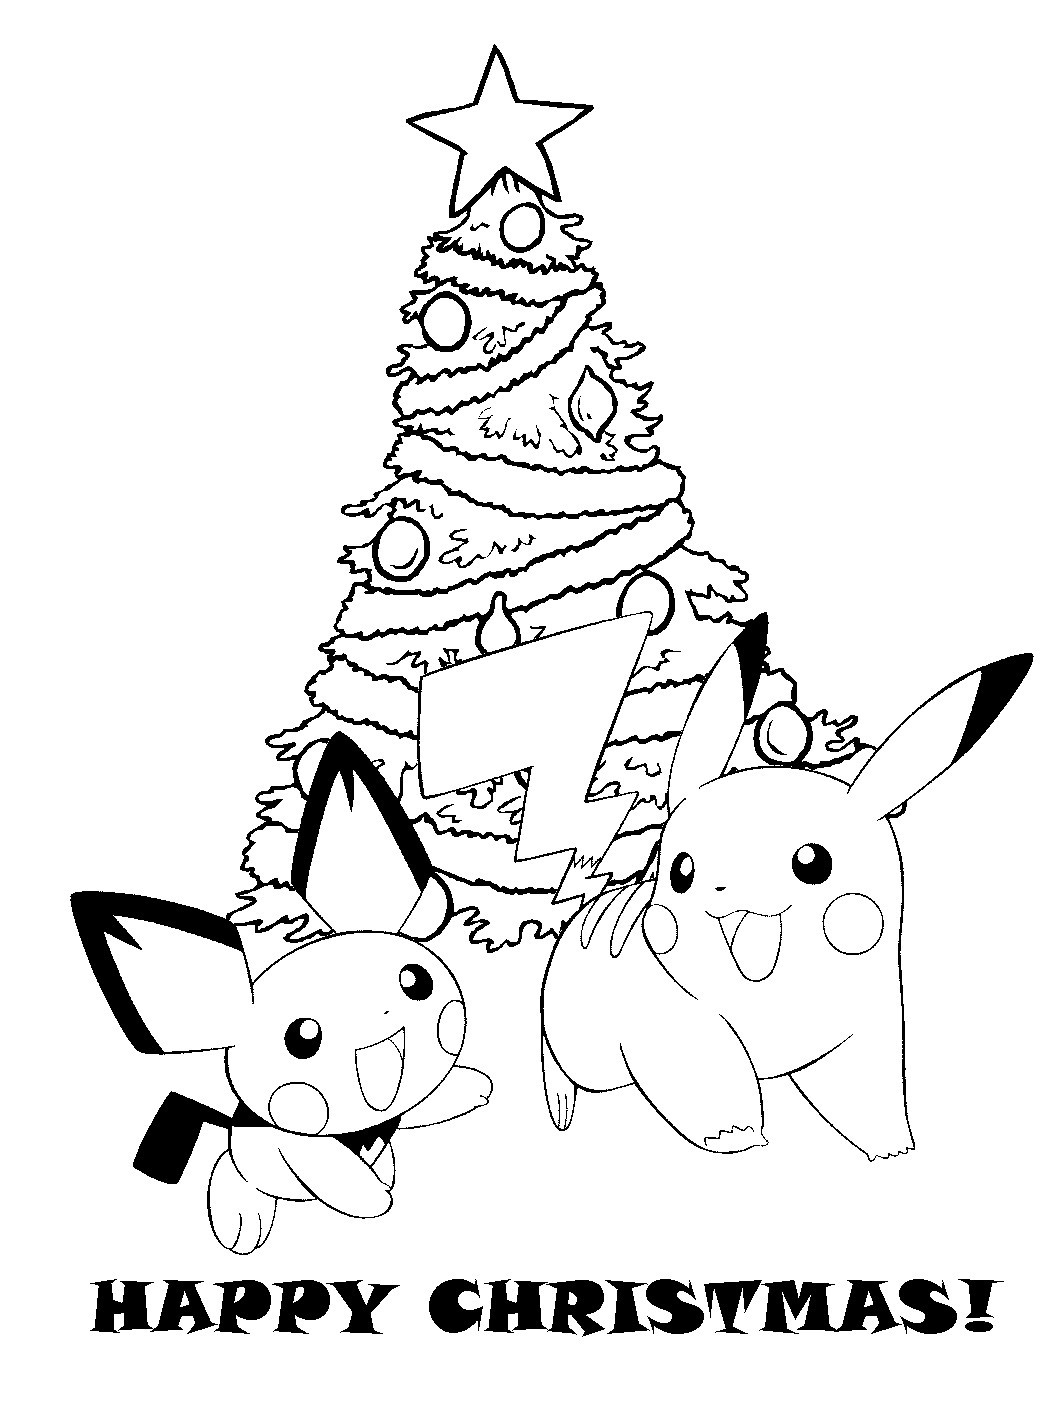 pokemon christmas coloring pages awesome coloring pages for christmas best 33 best color it coloring pages of pokemon christmas coloring pages